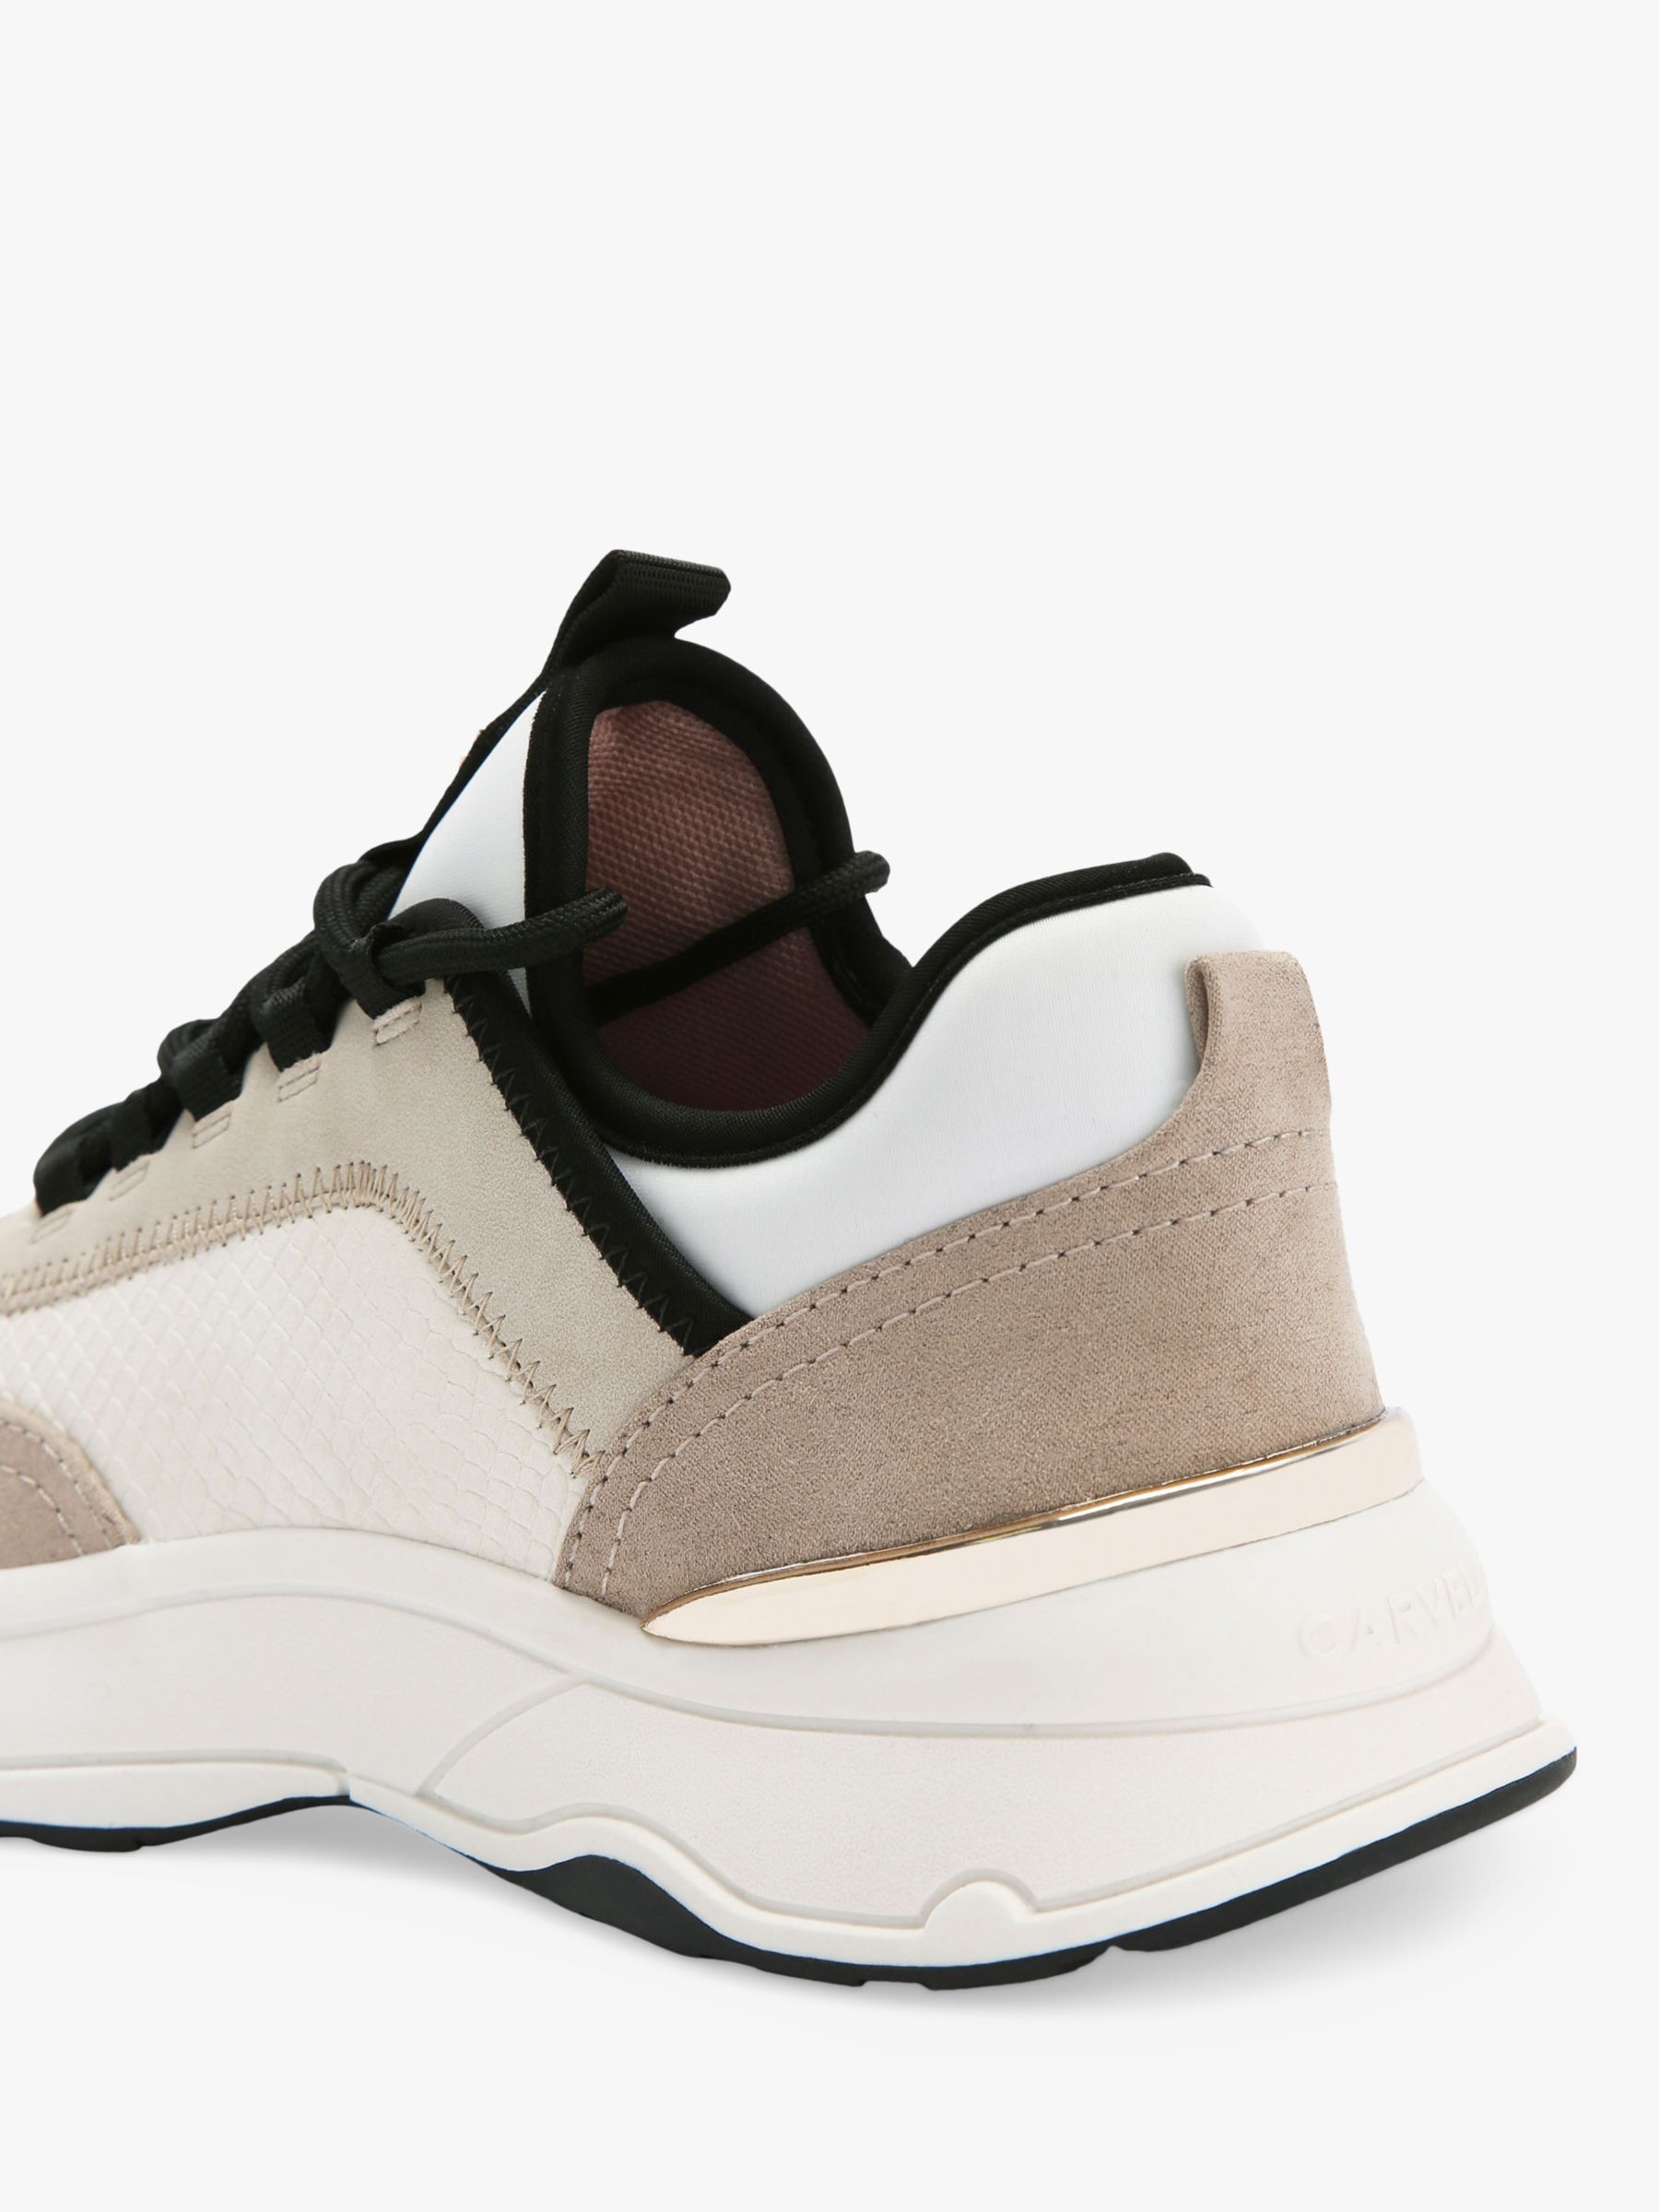 Buy Carvela Swift Runner Lace Up Trainers Online at johnlewis.com